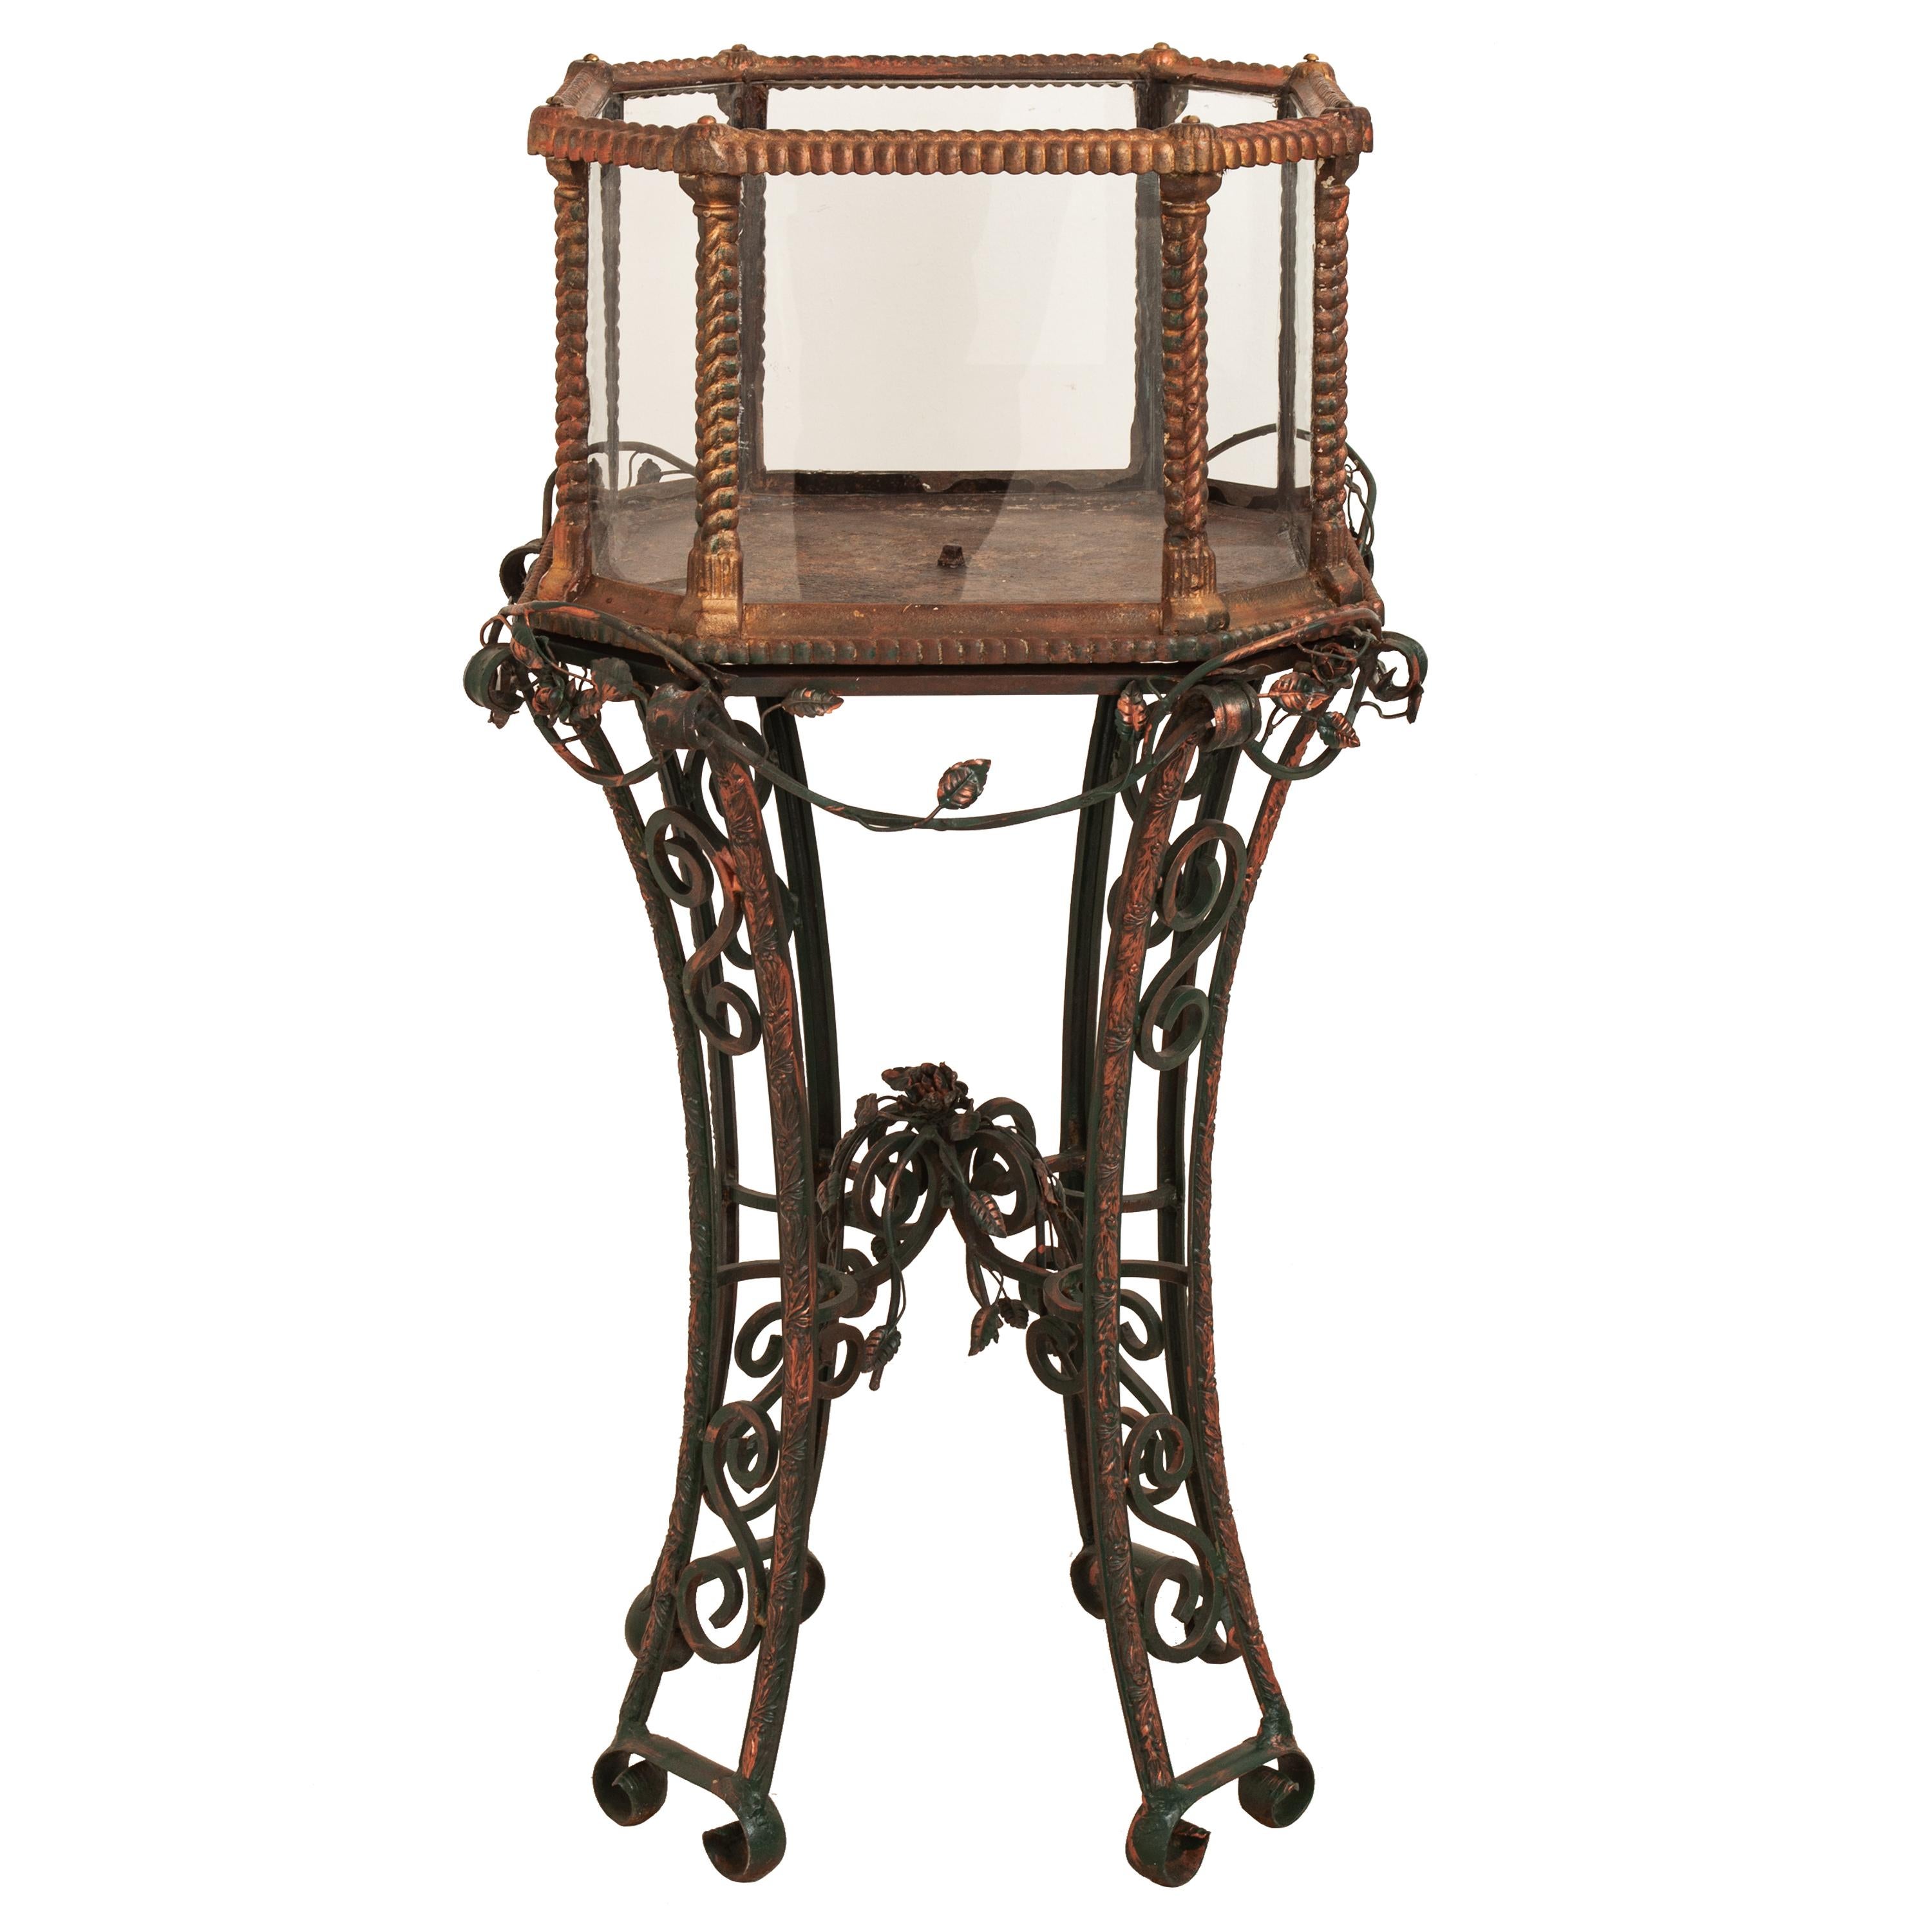 A rare antique gilded cast and wrought iron Rococo Revival terrarium/aquarium on stand, attributed to J. W. Fiske & Co., NY, circa 1880.
The two section terrarium having a gilt cast iron octagonal top, glazed on each side and having cast 'ropework'